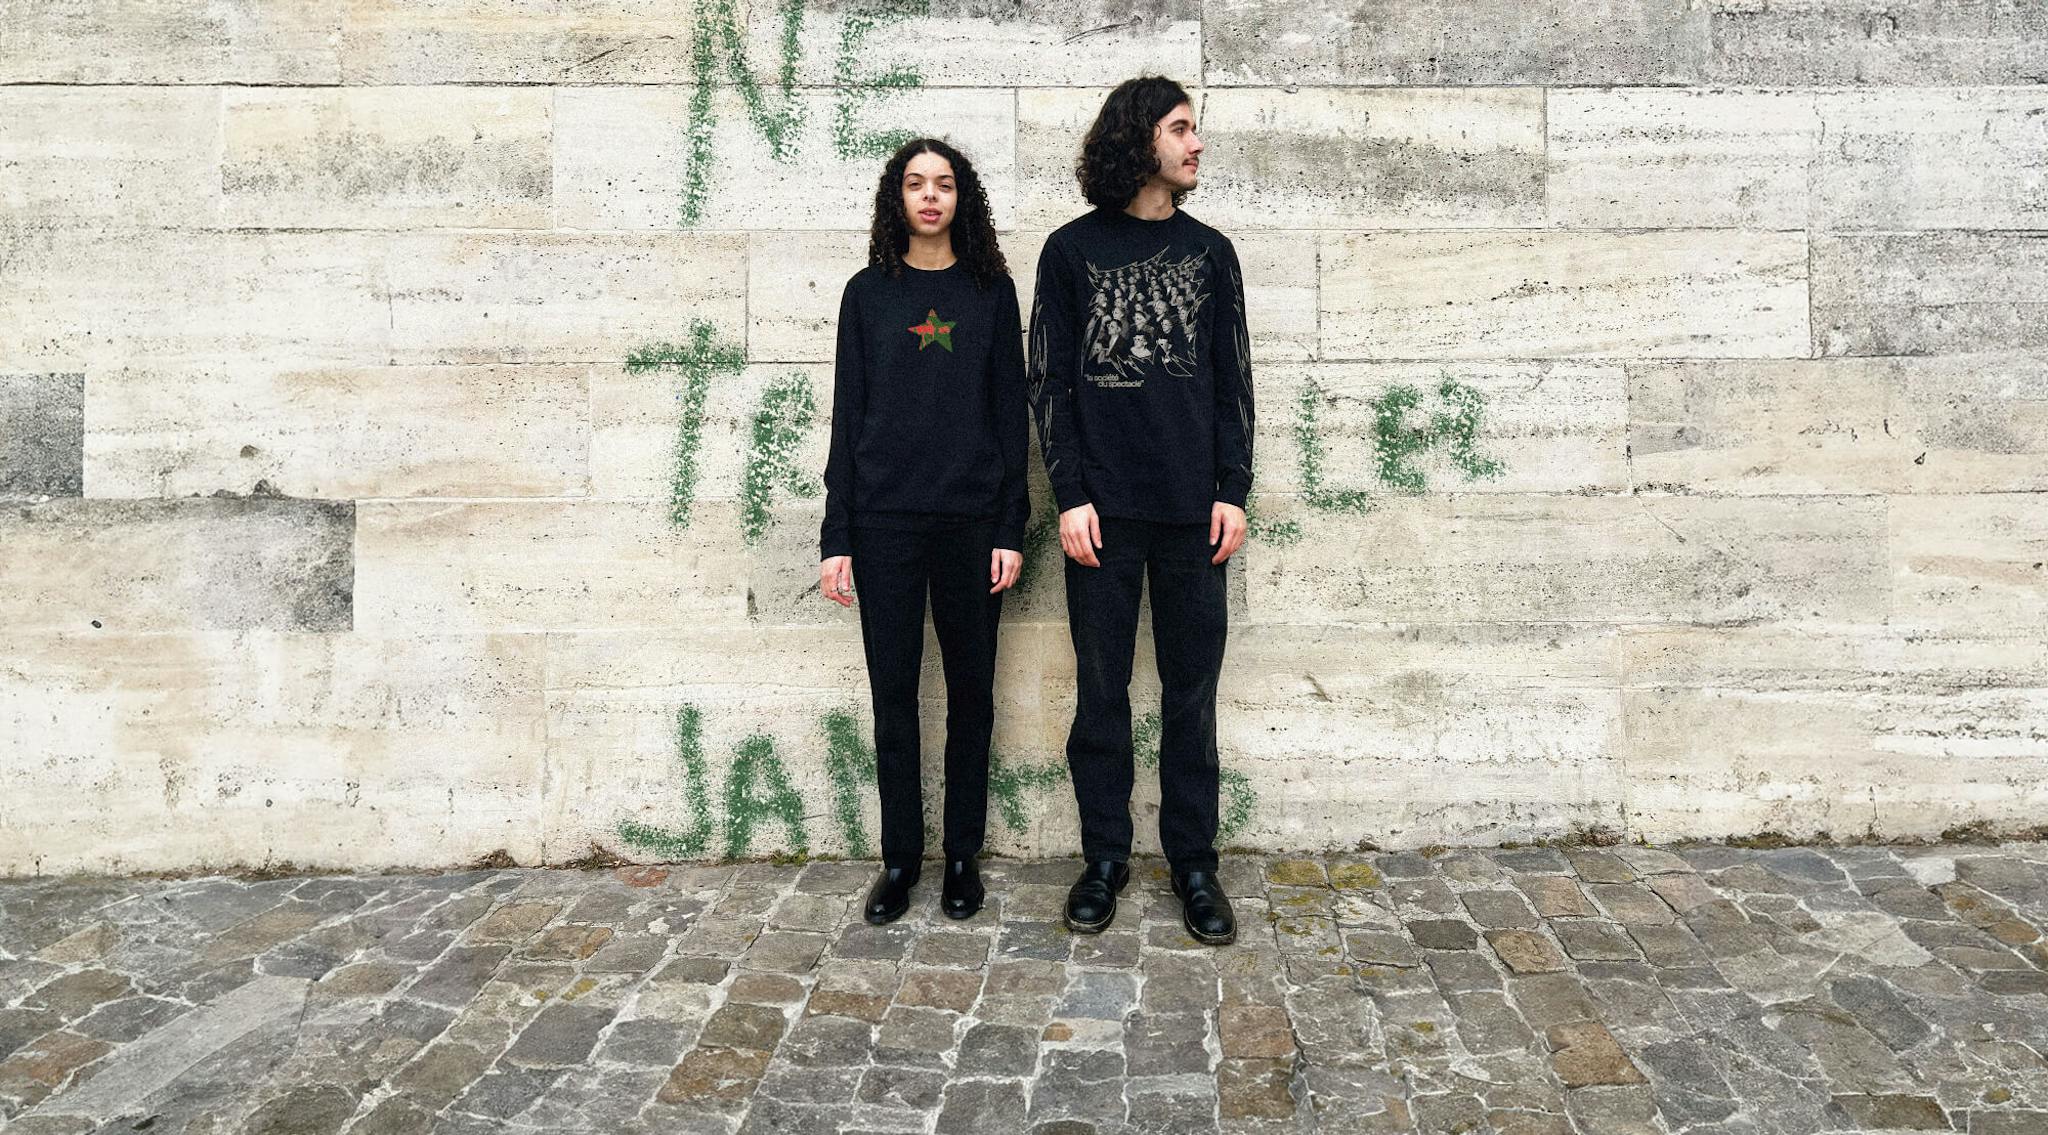 Two individuals in black attire against a graffitied wall.